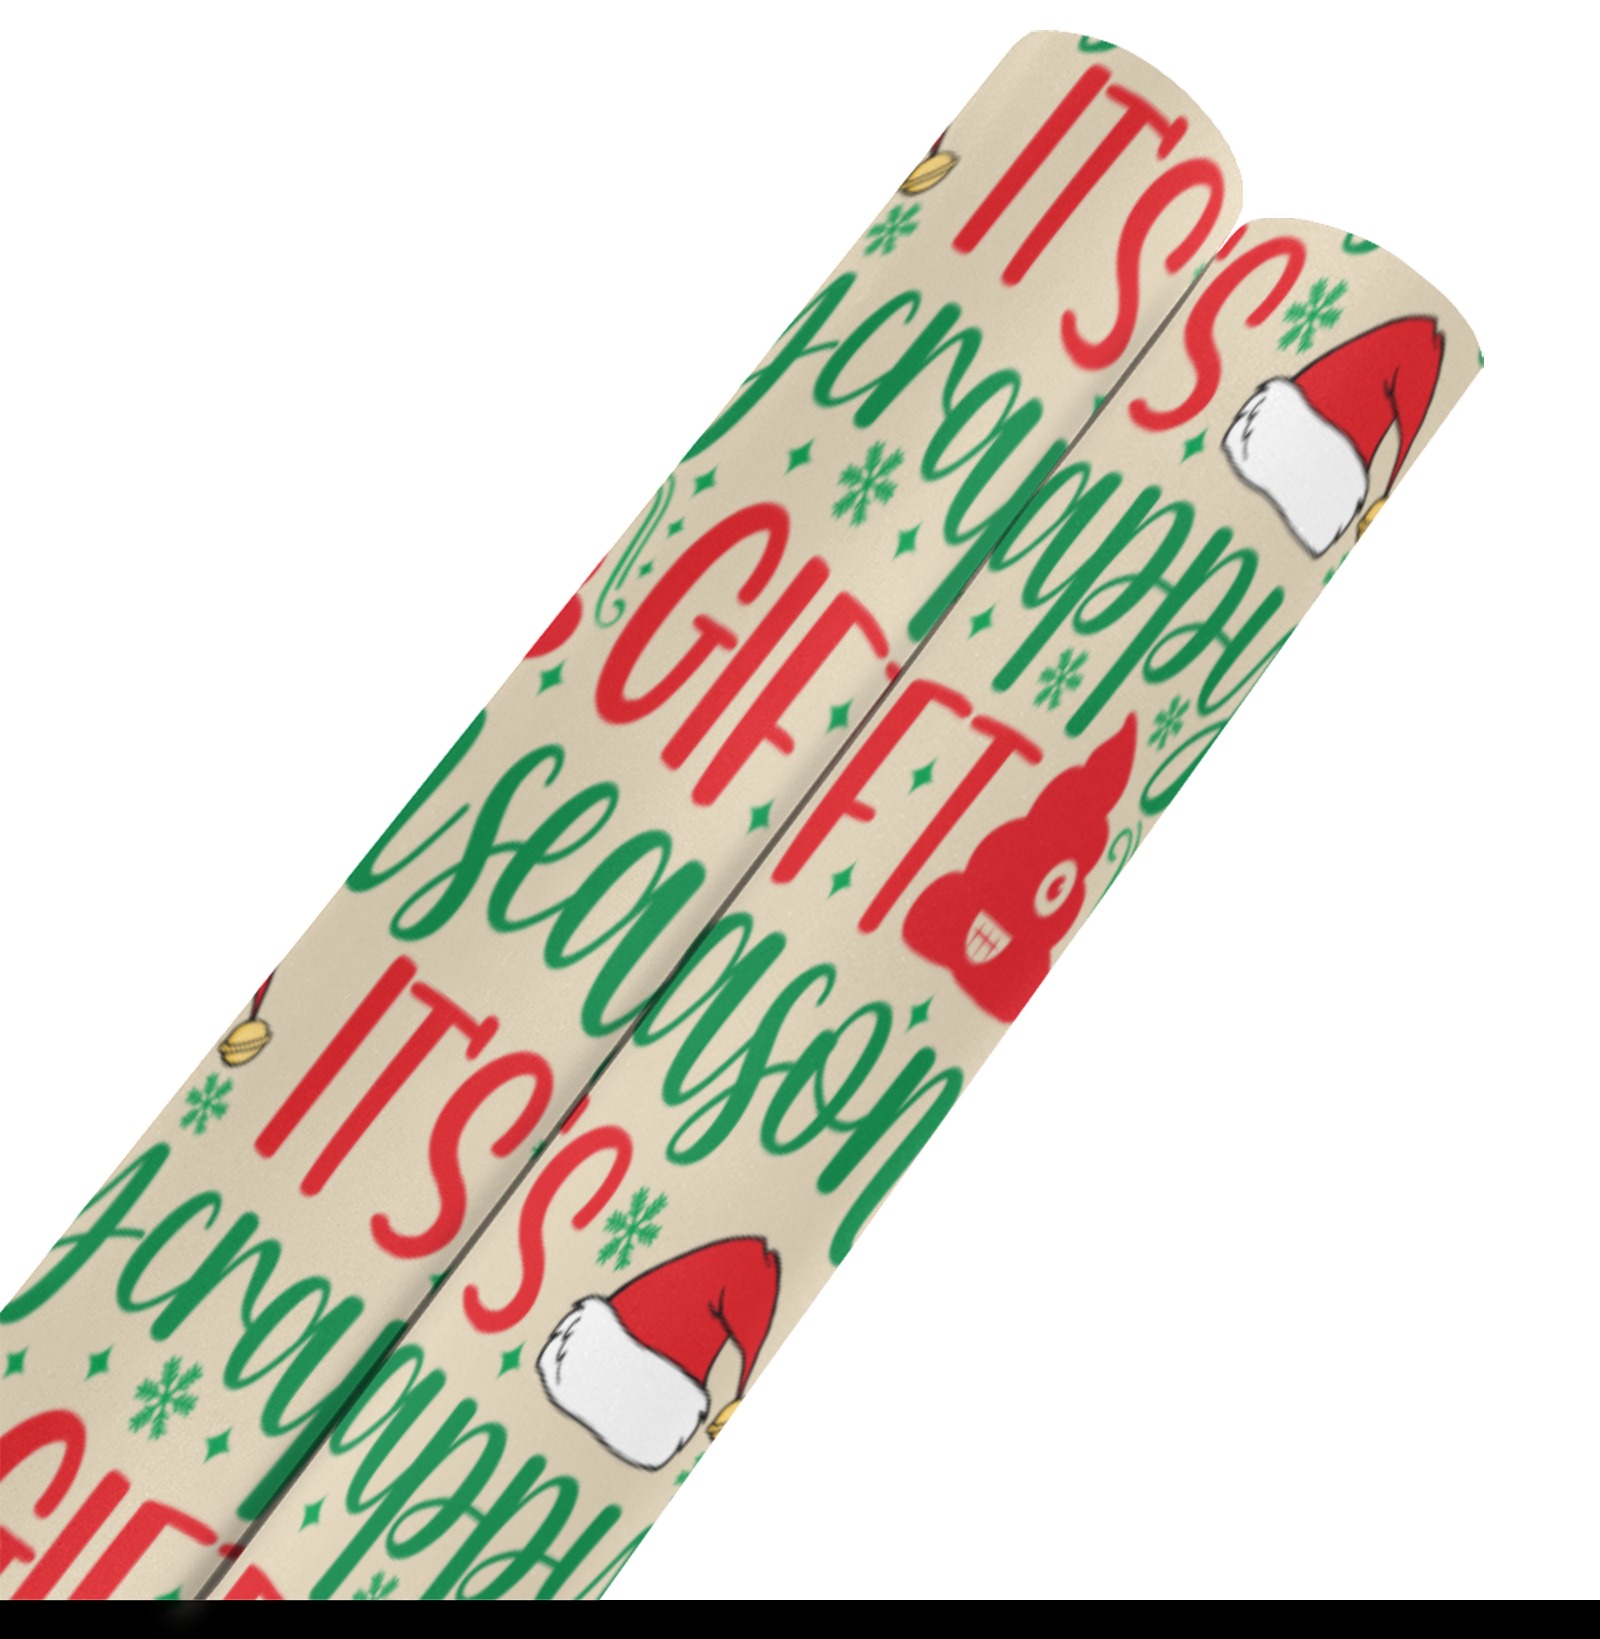 It's Crappy Gift Season Gift Wrapping Paper 58"x 23" (2 Rolls)